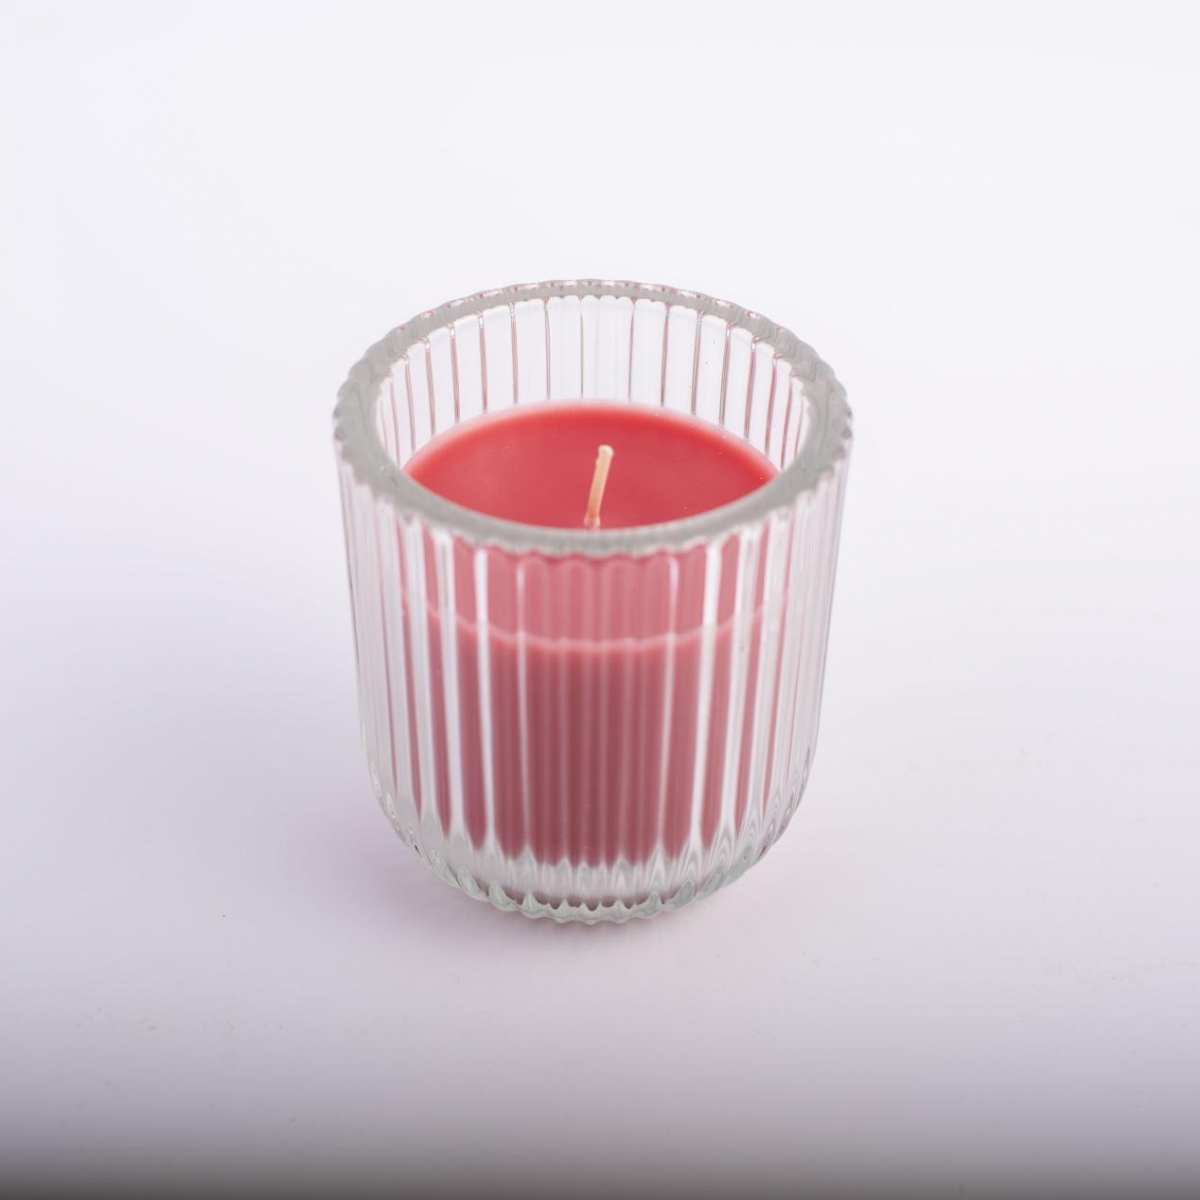 Christmas Candles – Red Candle ,Striped Glass ,Home Fragrance ,China Factory ,Wholesale Pirce-HOWCANDLE-Candles,Scented Candles,Aromatherapy Candles,Soy Candles,Vegan Candles,Jar Candles,Pillar Candles,Candle Gift Sets,Essential Oils,Reed Diffuser,Candle Holder,